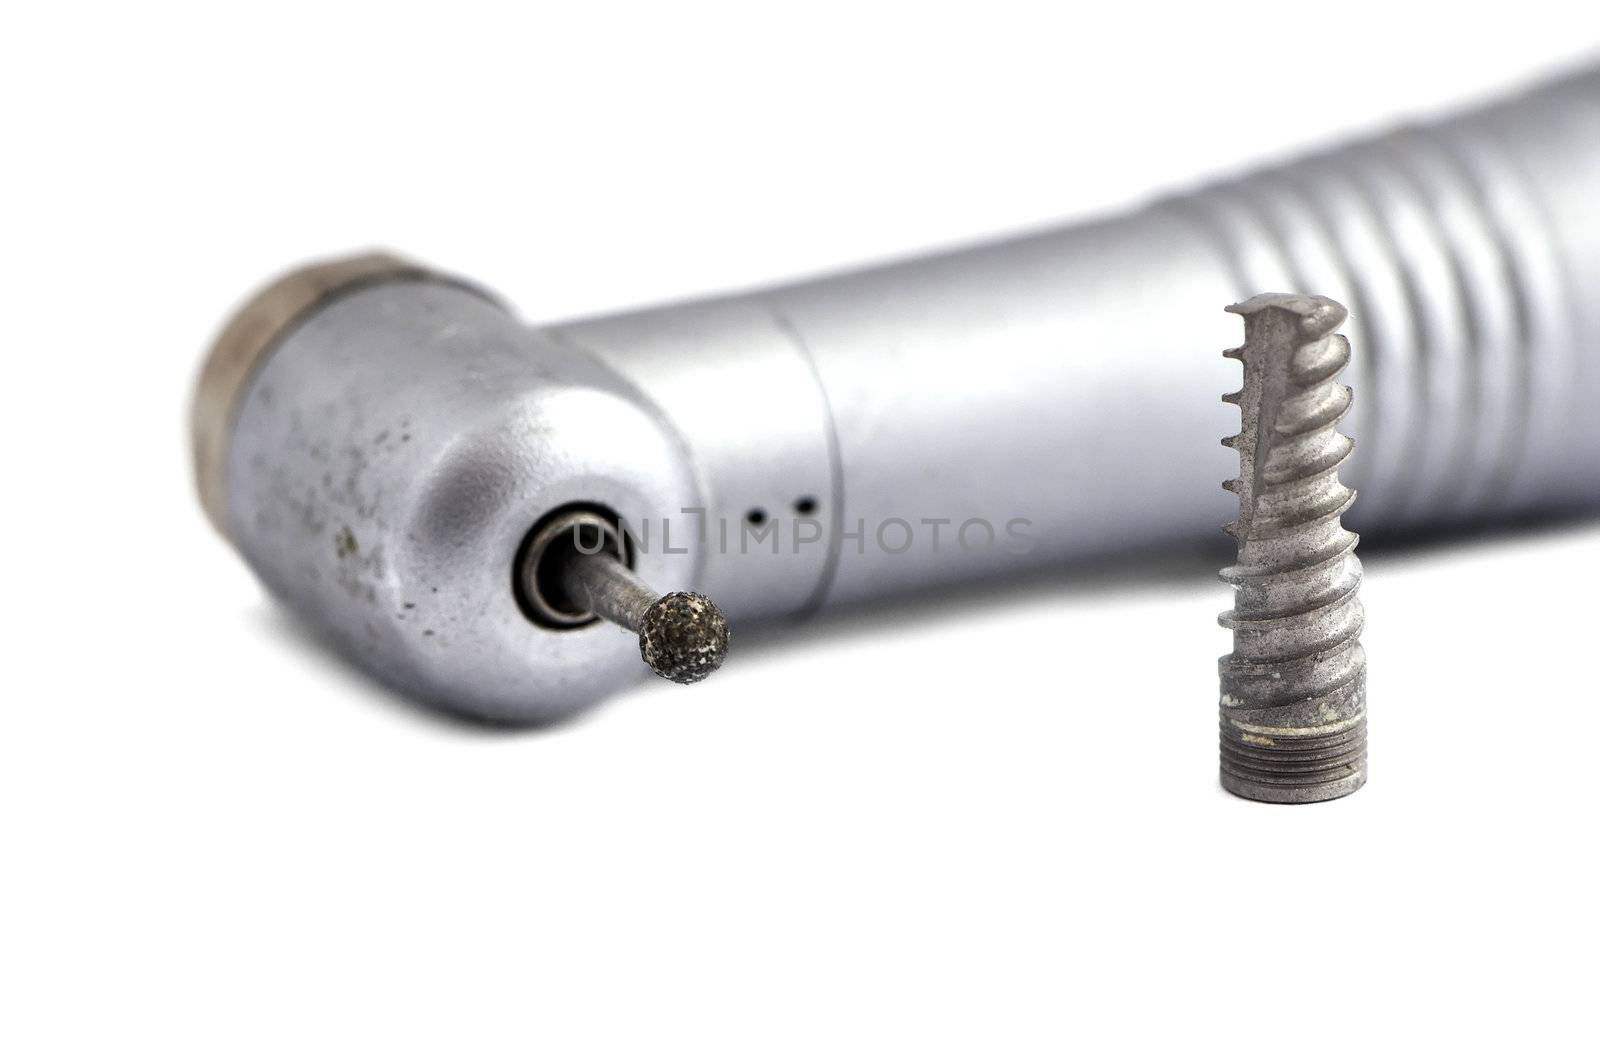 dental handpiece and  implant on a white background